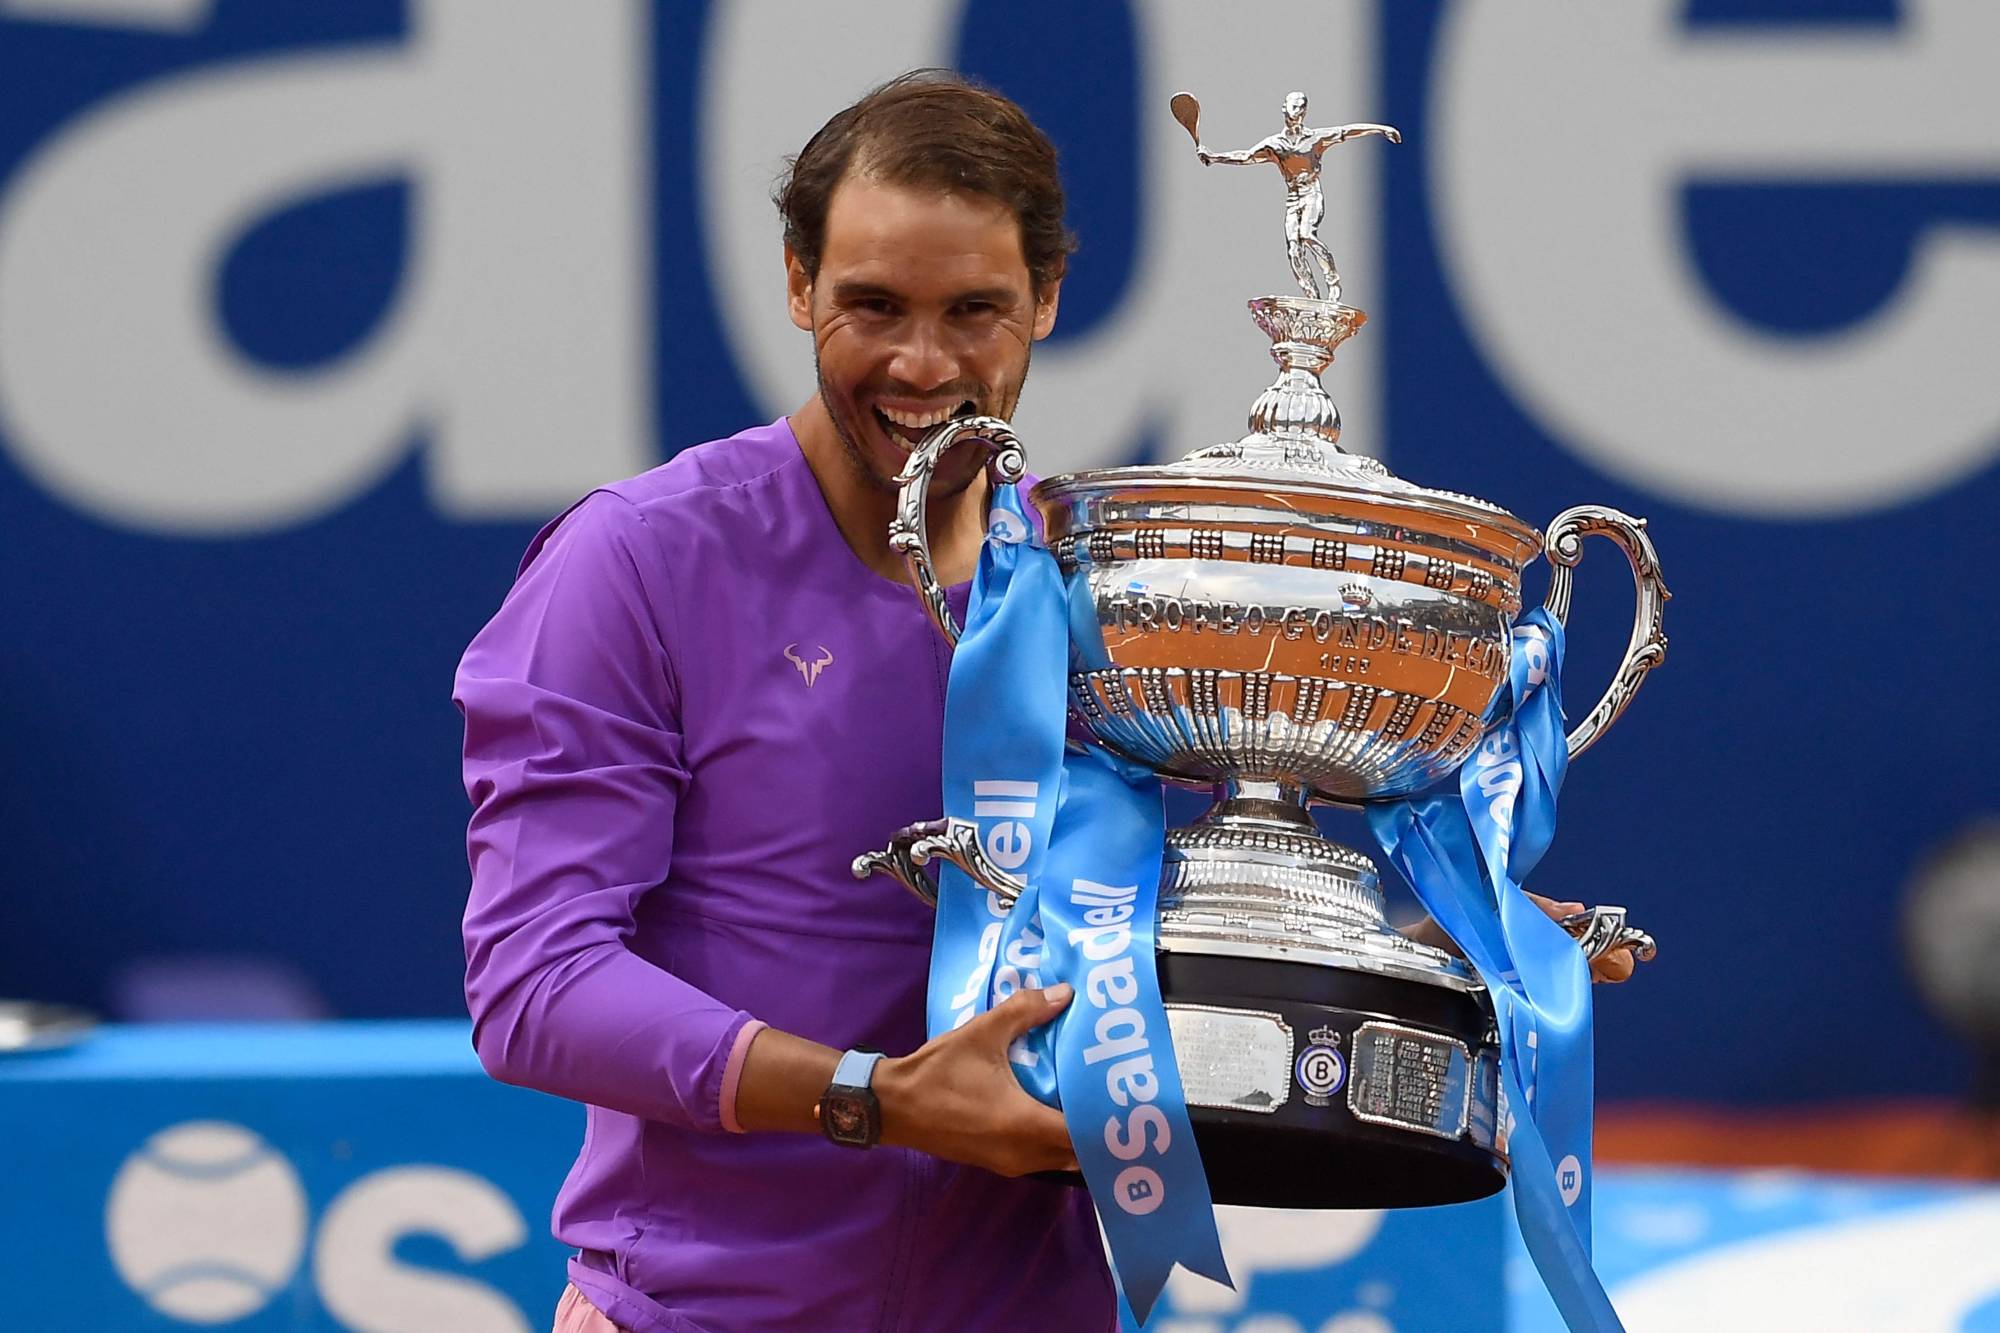 Rafael Nadal saves match point to beat Stefanos Tsitsipas for 12th Barcelona title